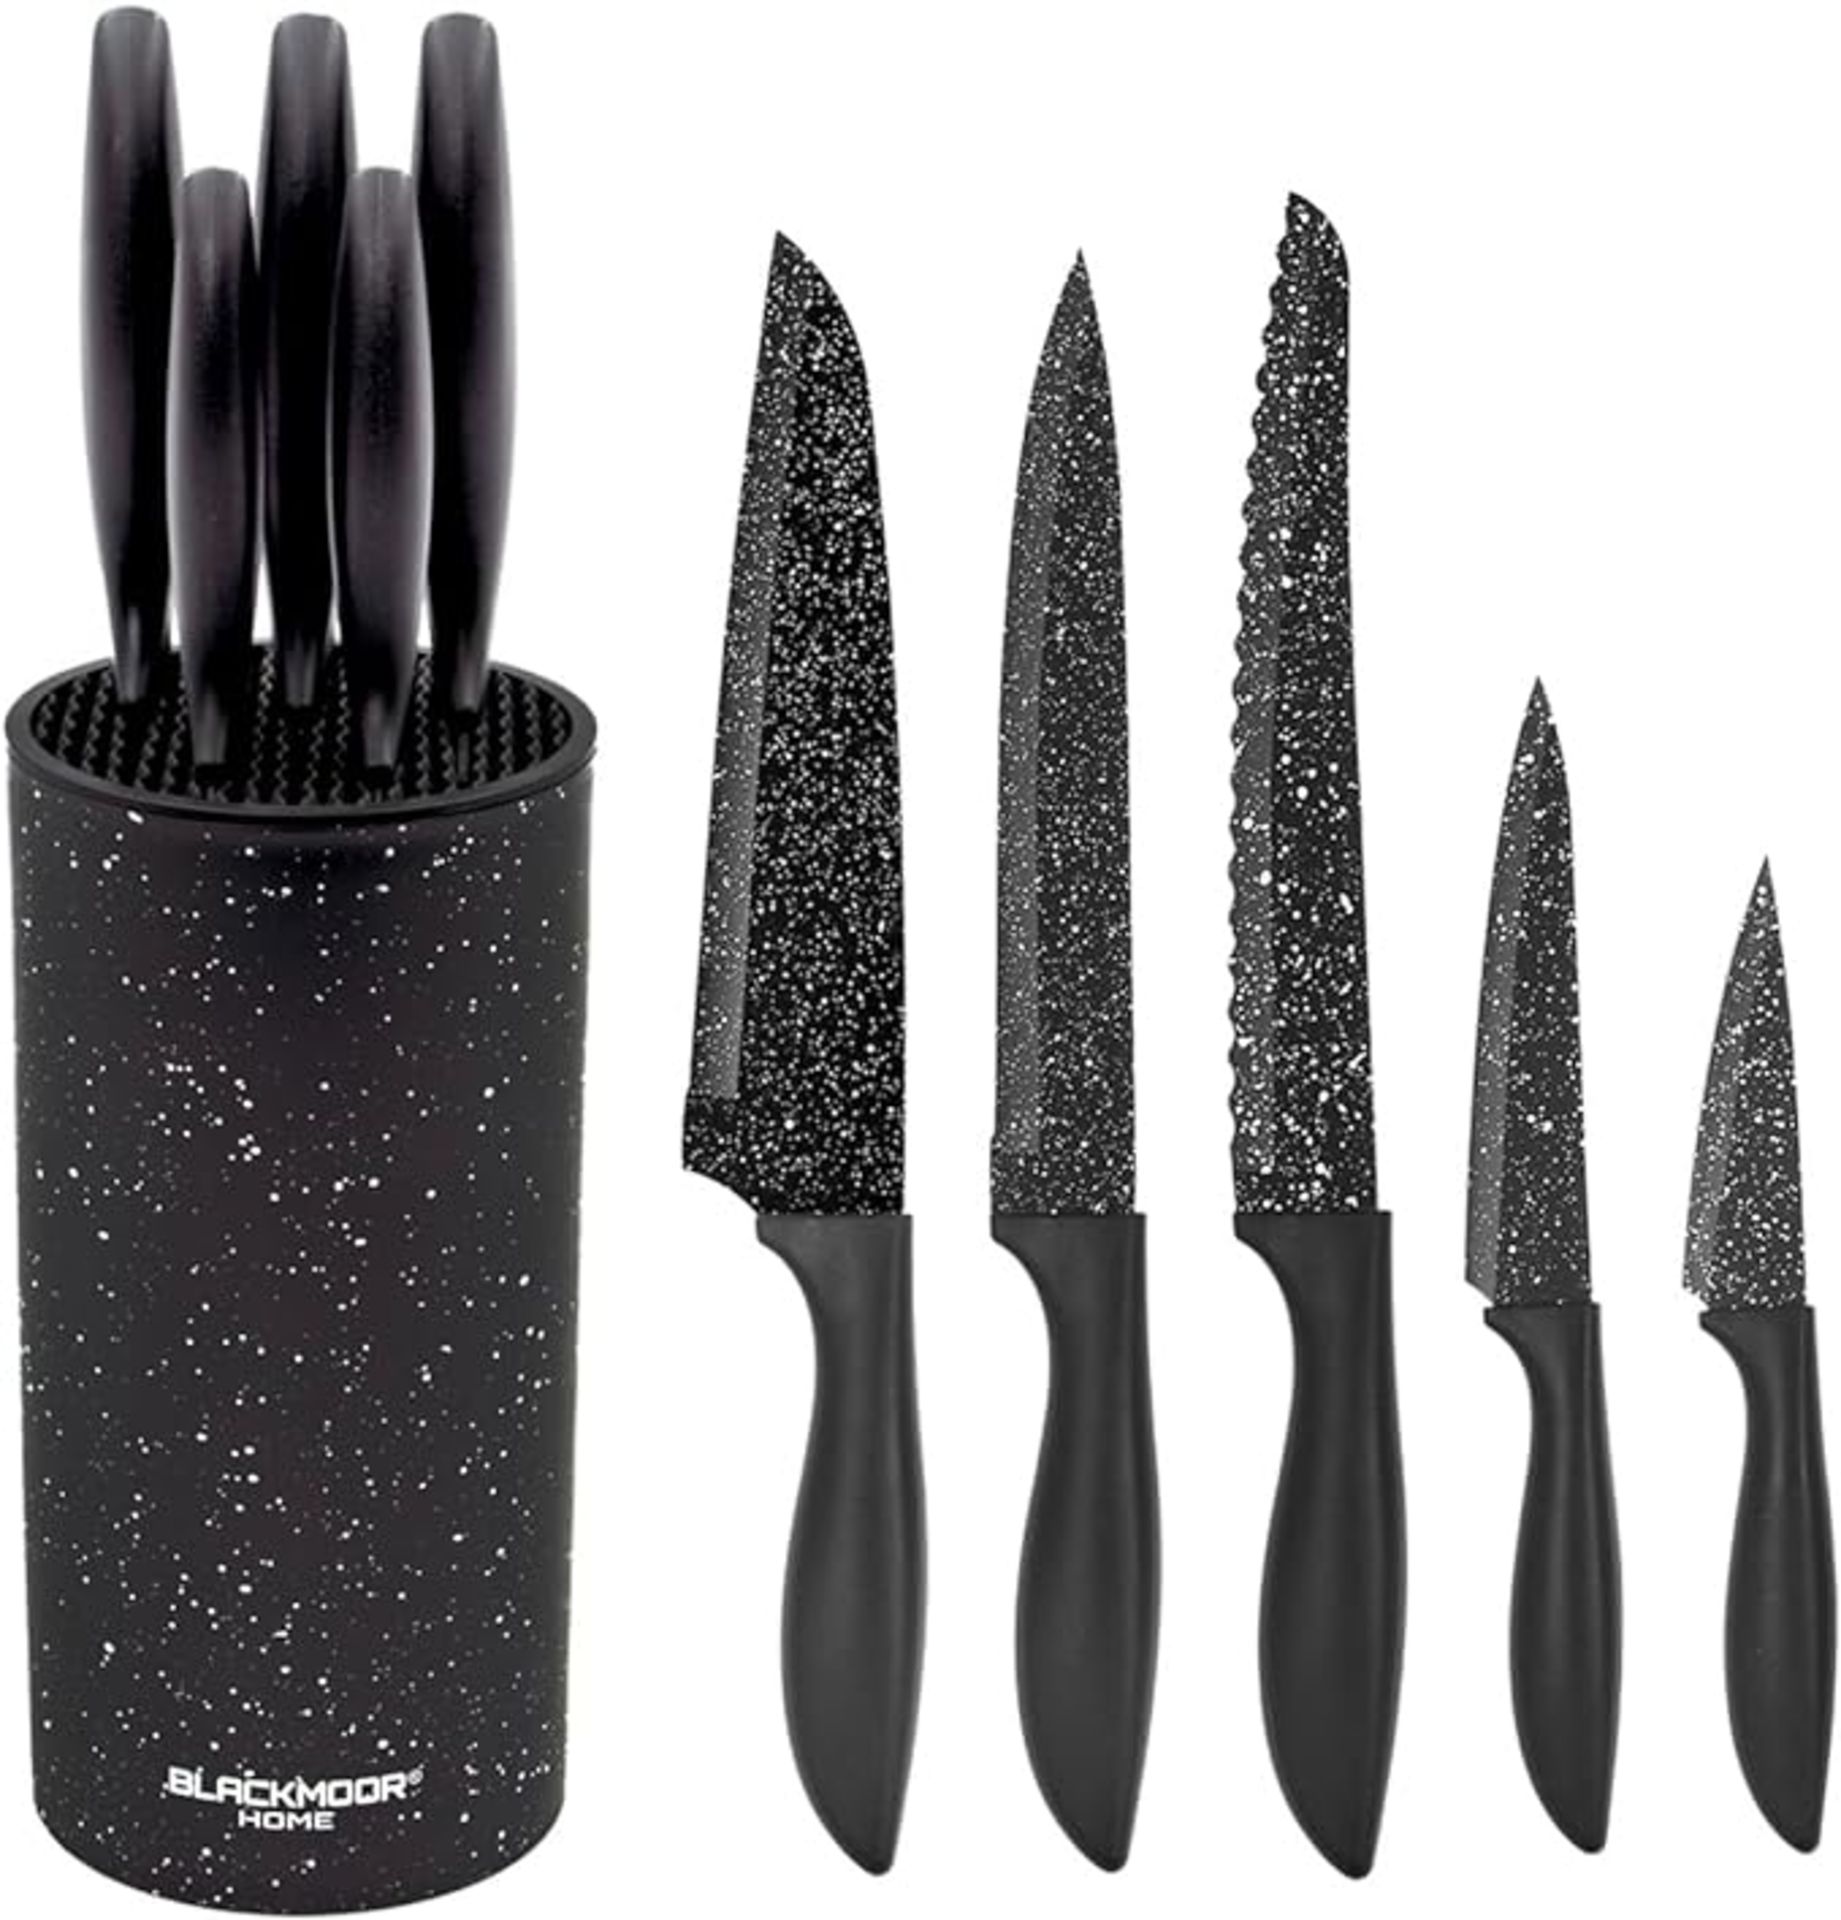 2 x Blackmoor 66929 5-Piece Knife Set/Comes with Freestanding Storage Block/Stainless Steel Knives/